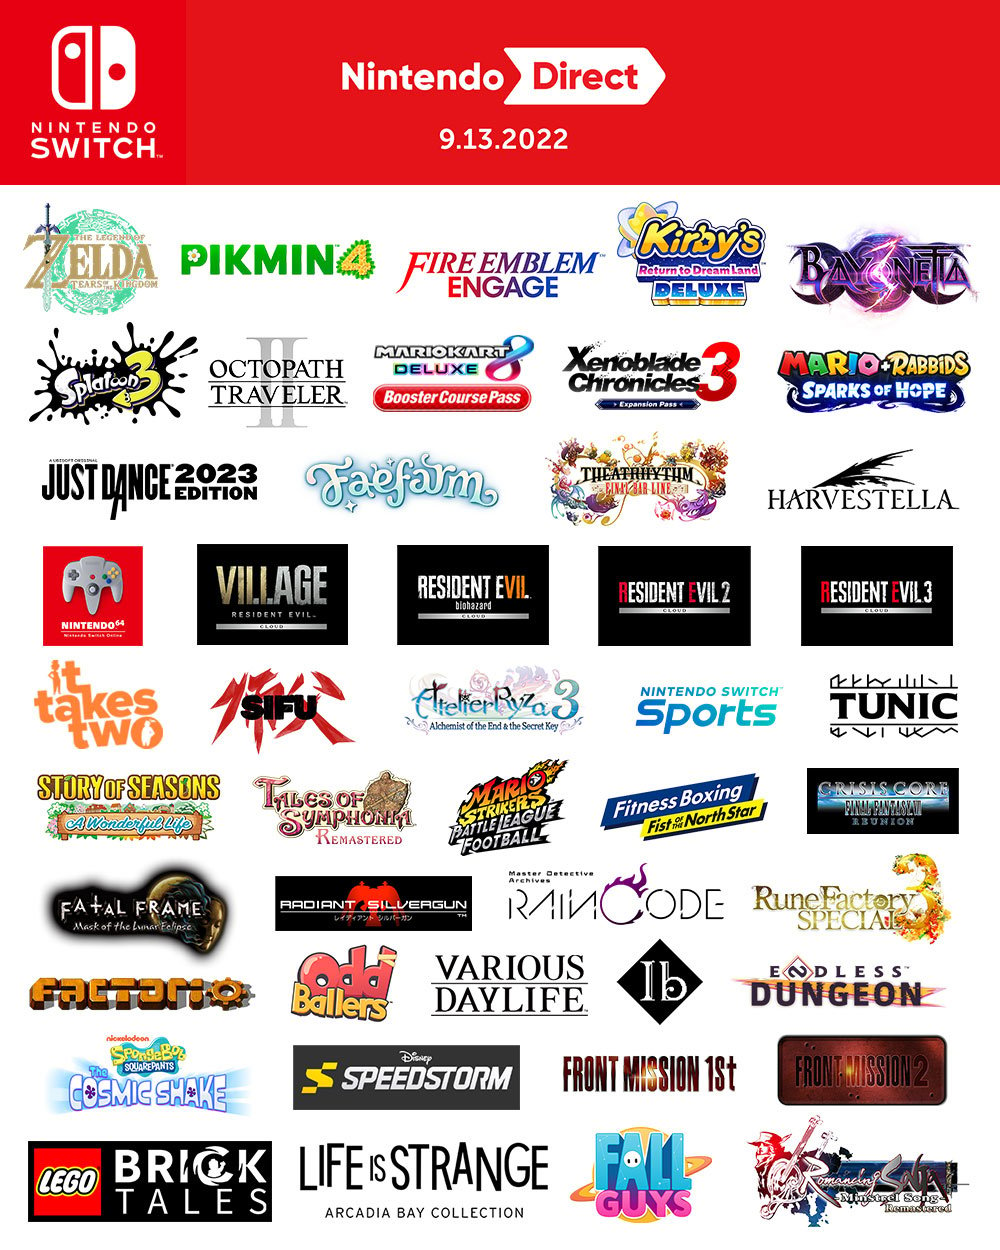 Nintendo infographic shows every game featured in the September Direct